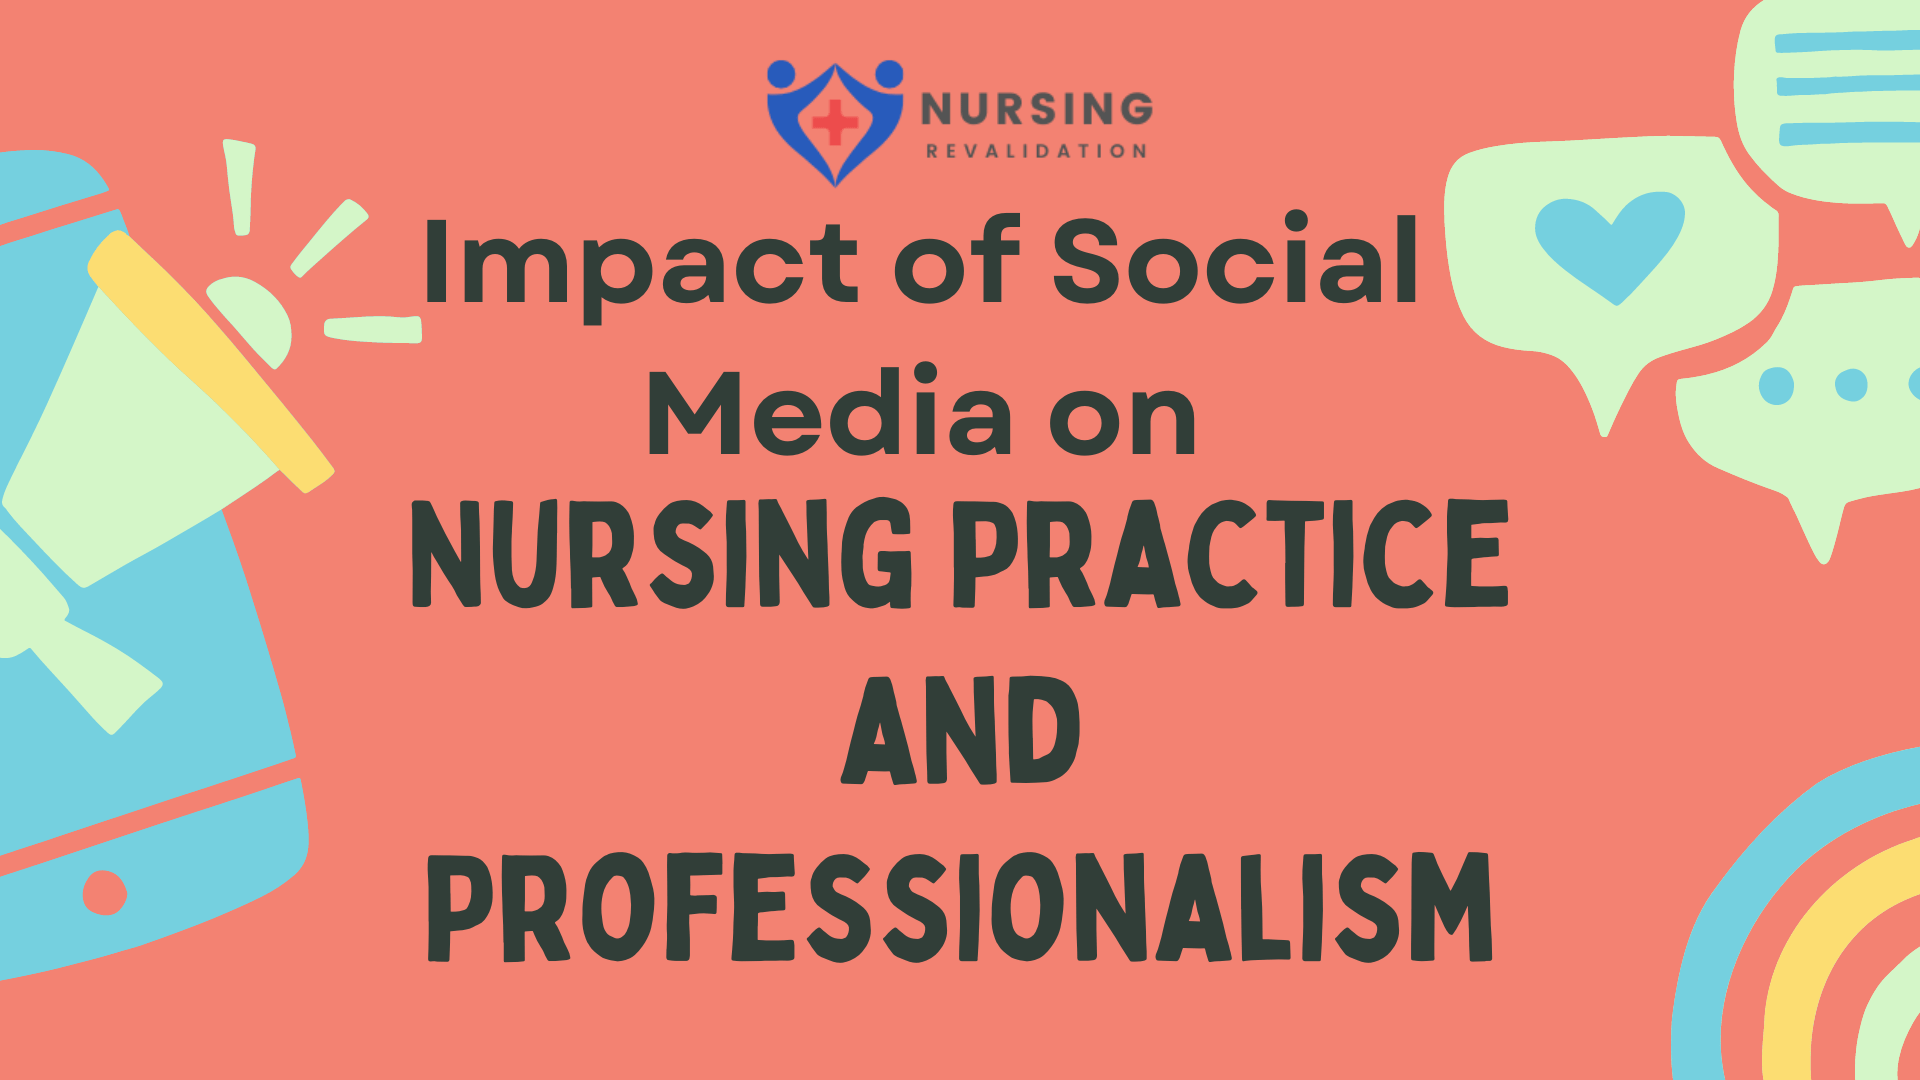 Impact of Social Media on Nursing Practice and Professionalism